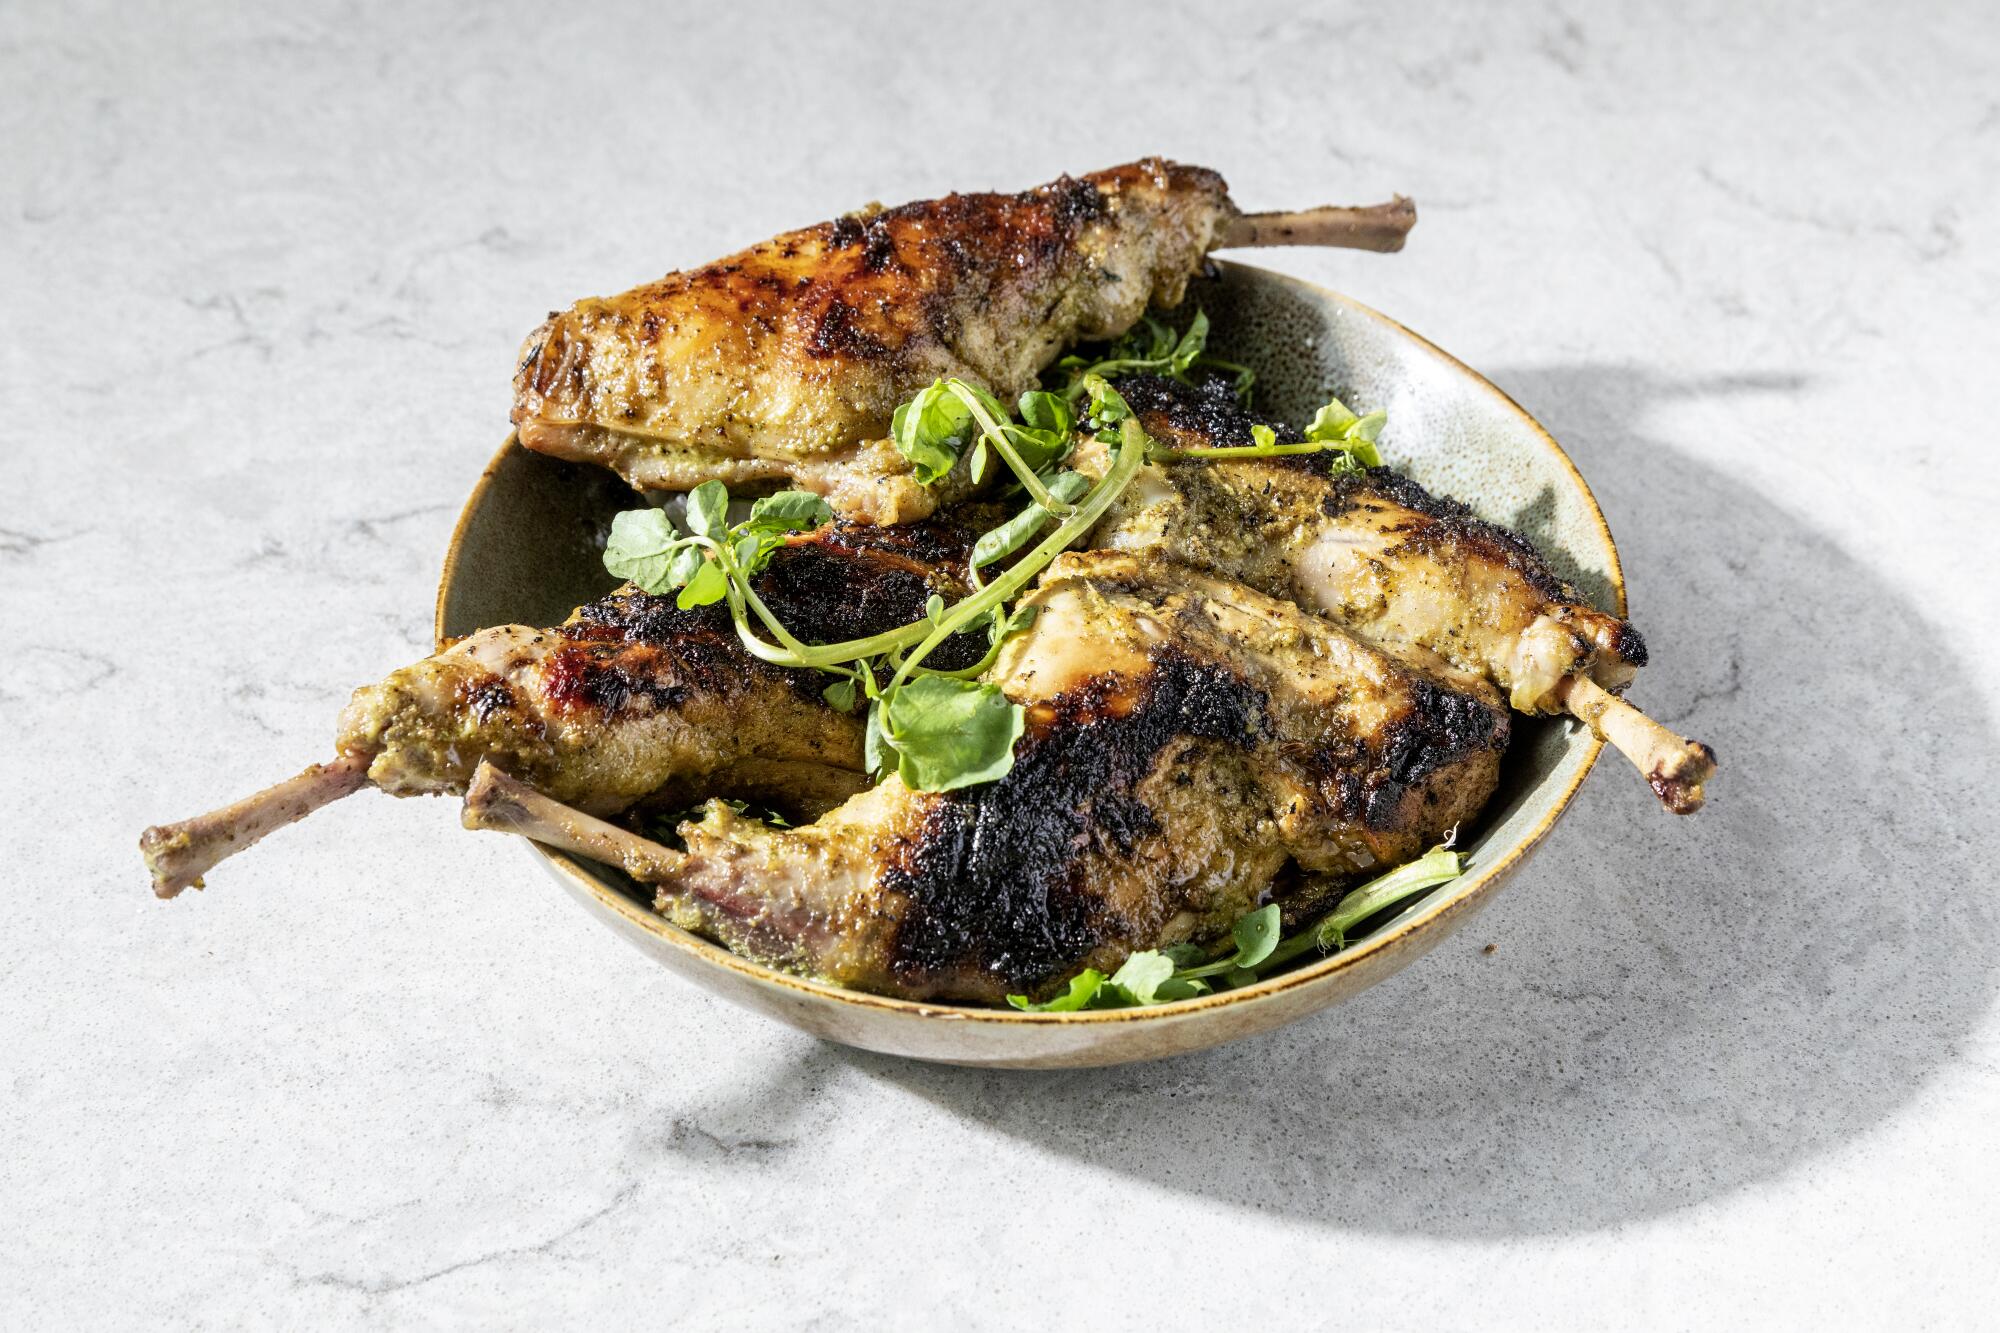 Grilled rabbit legs brined with coriander, fennel and thyme.